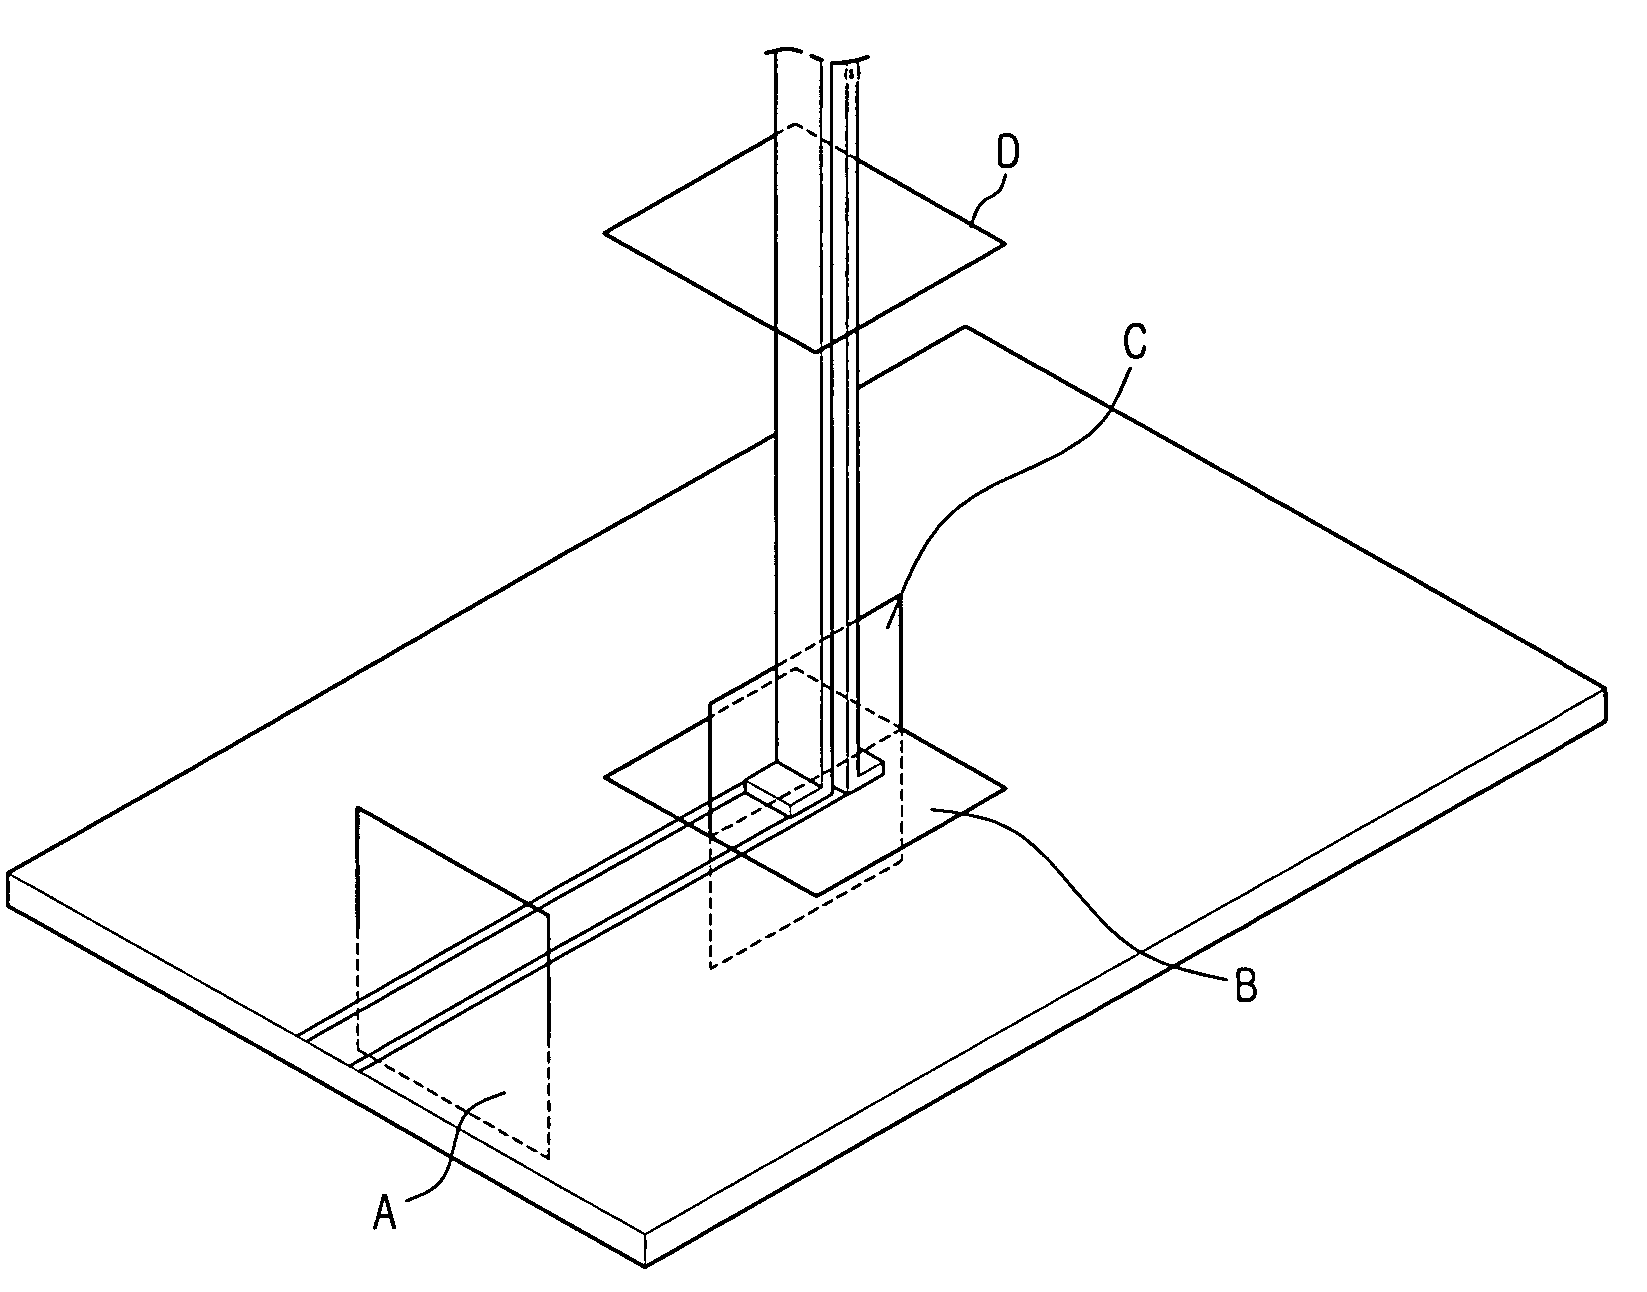 Apparatus for wideband transmission conversion from coplanar waveguide to parallel transmission line